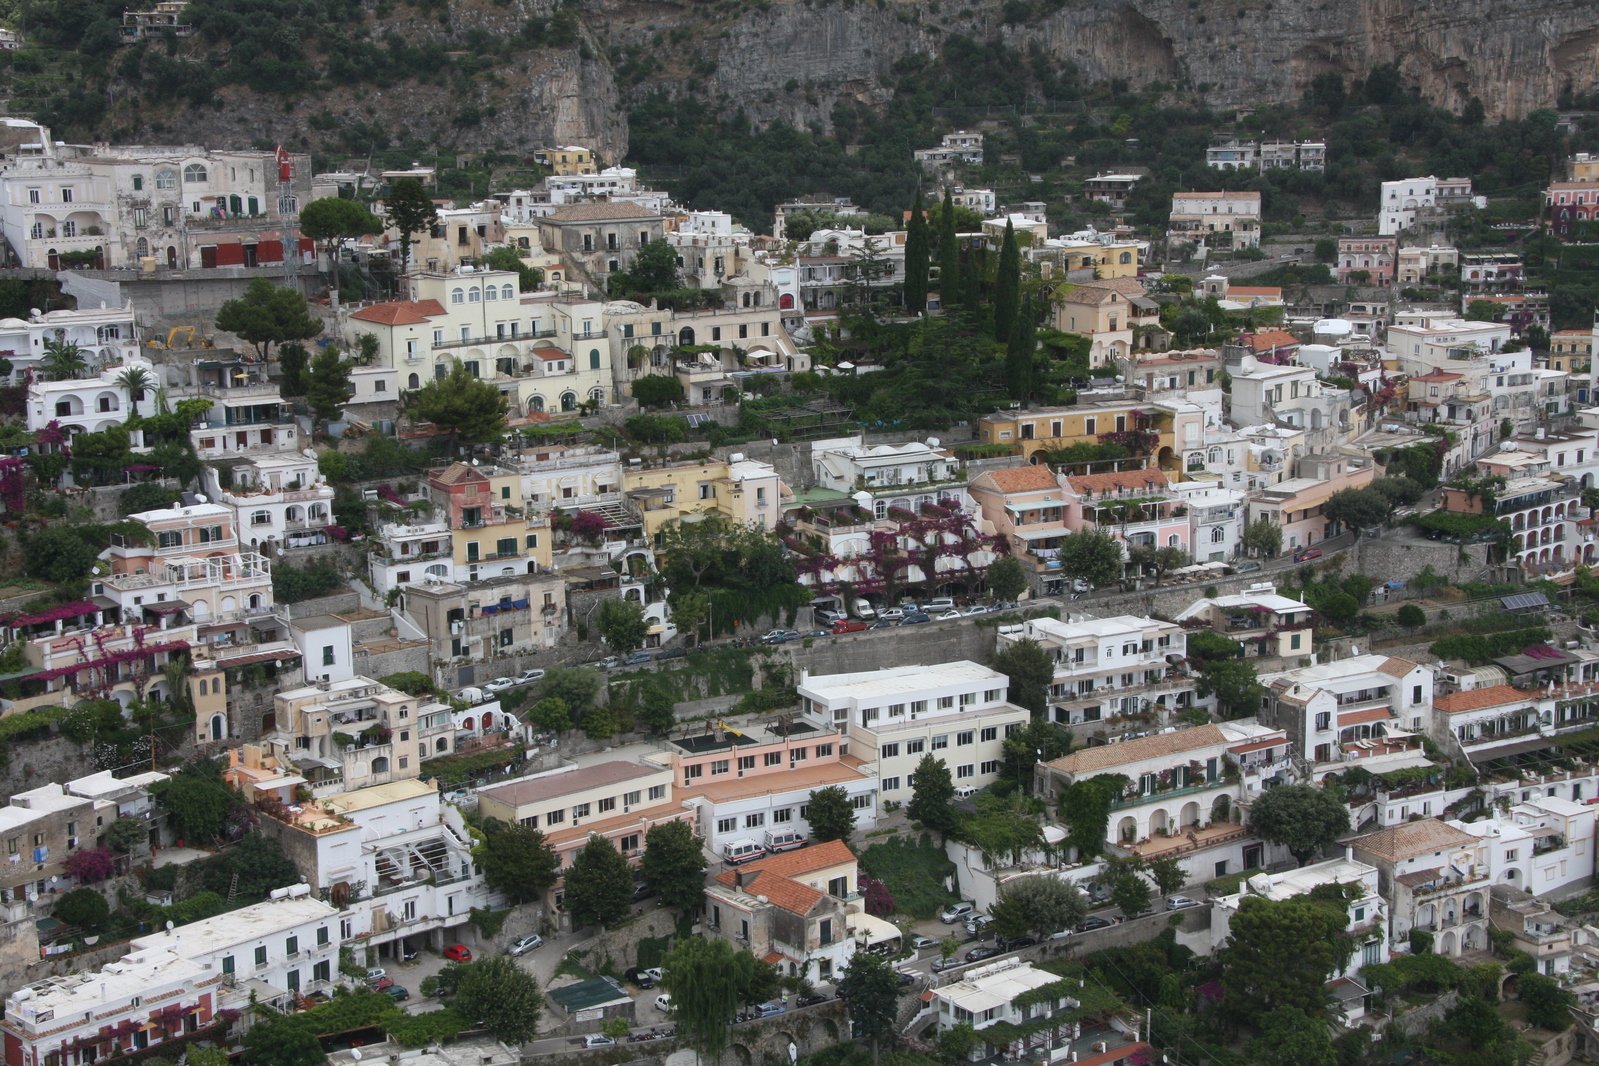 a view of a city, with many houses on the hillside